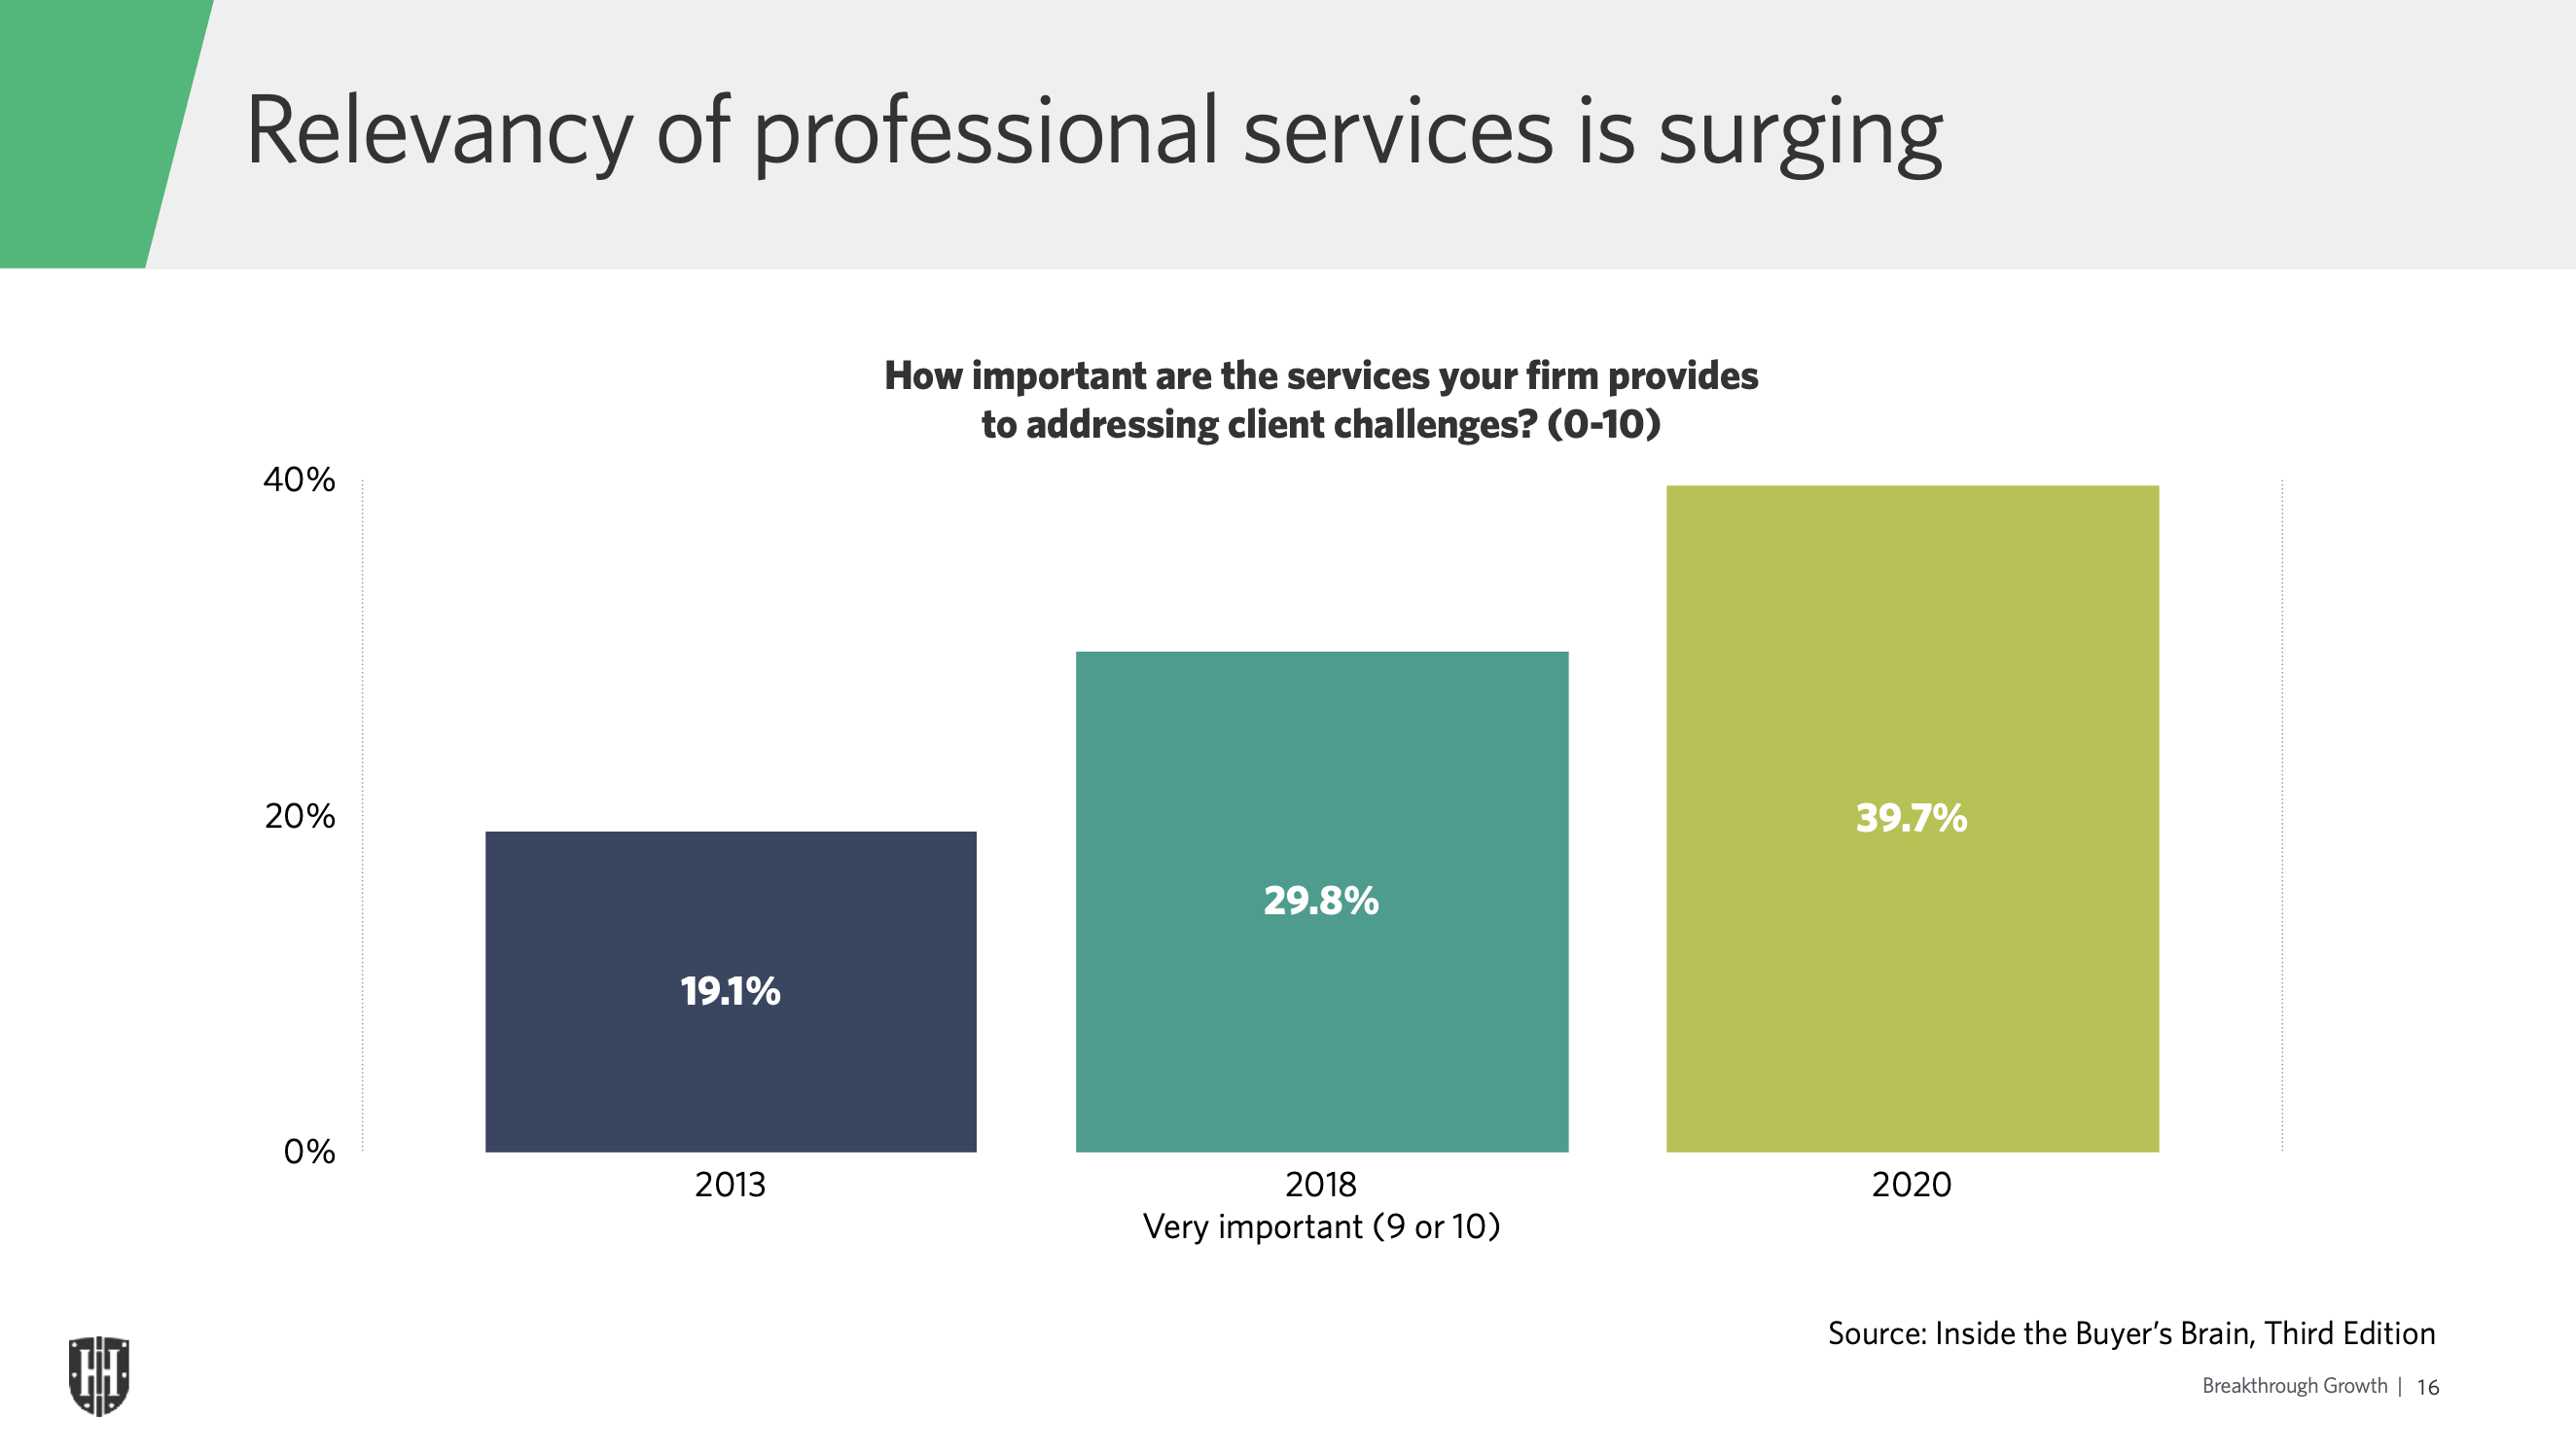 Relevancy of professional services in surging